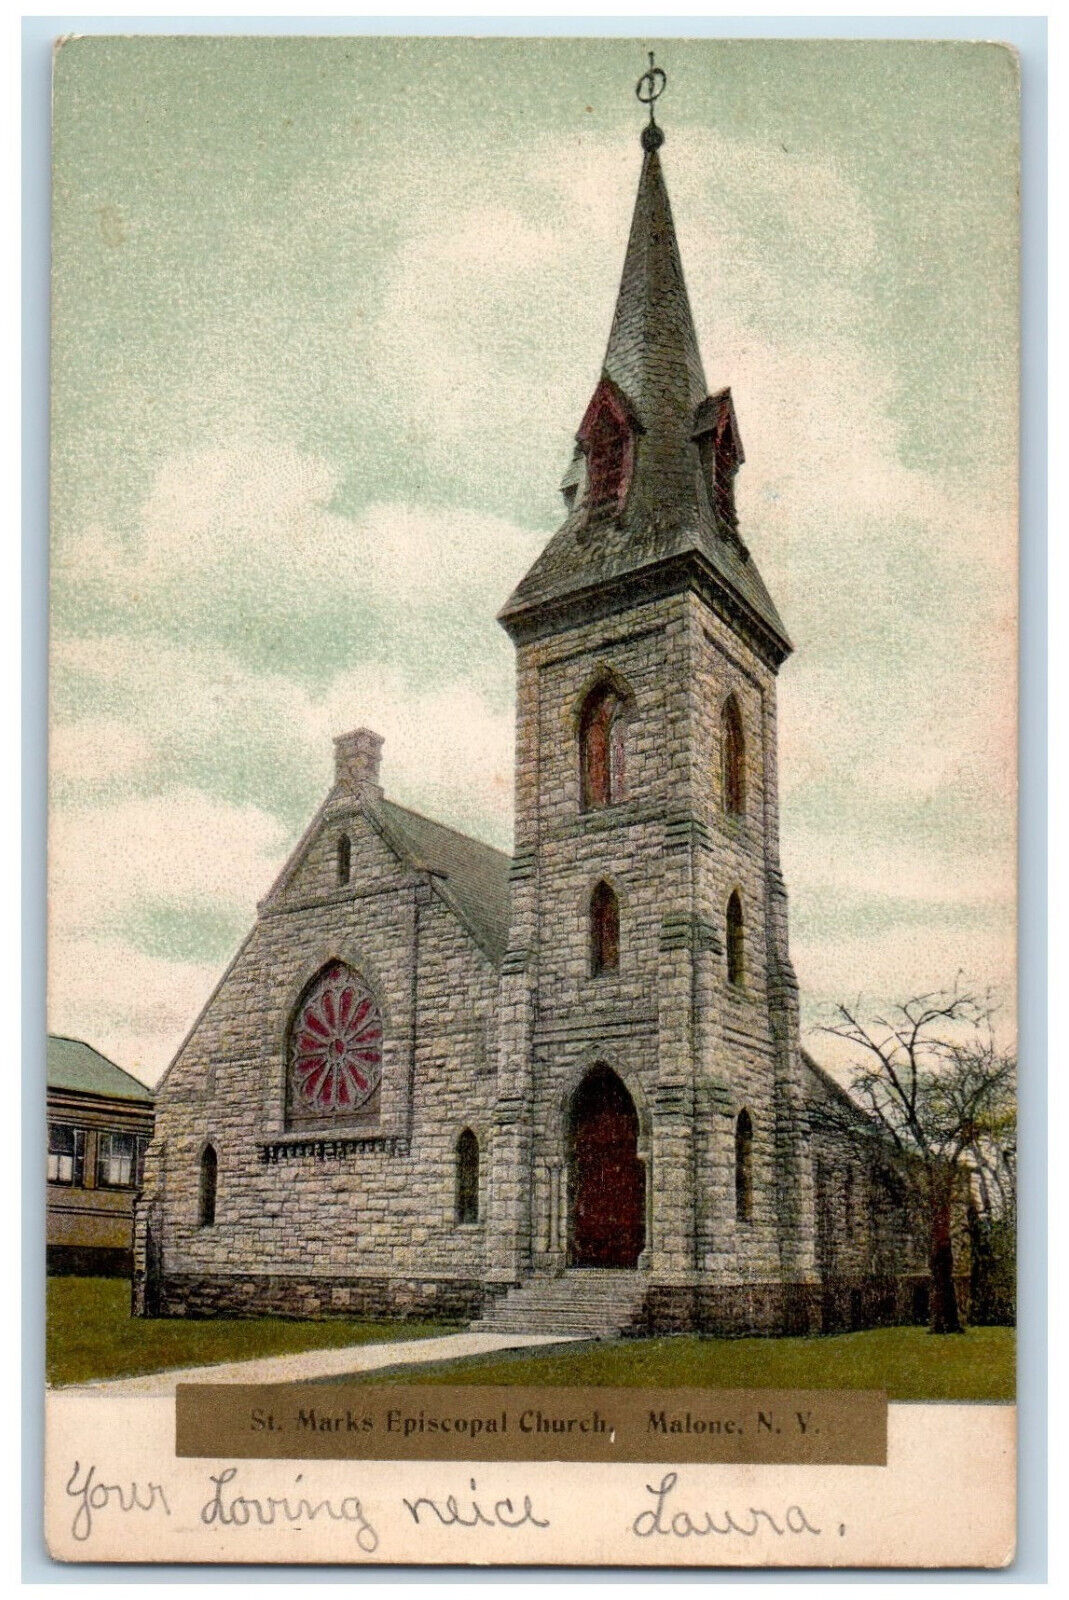 1908 St. Marks Episcopal Church, Malone New York NY Antique Posted Postcard